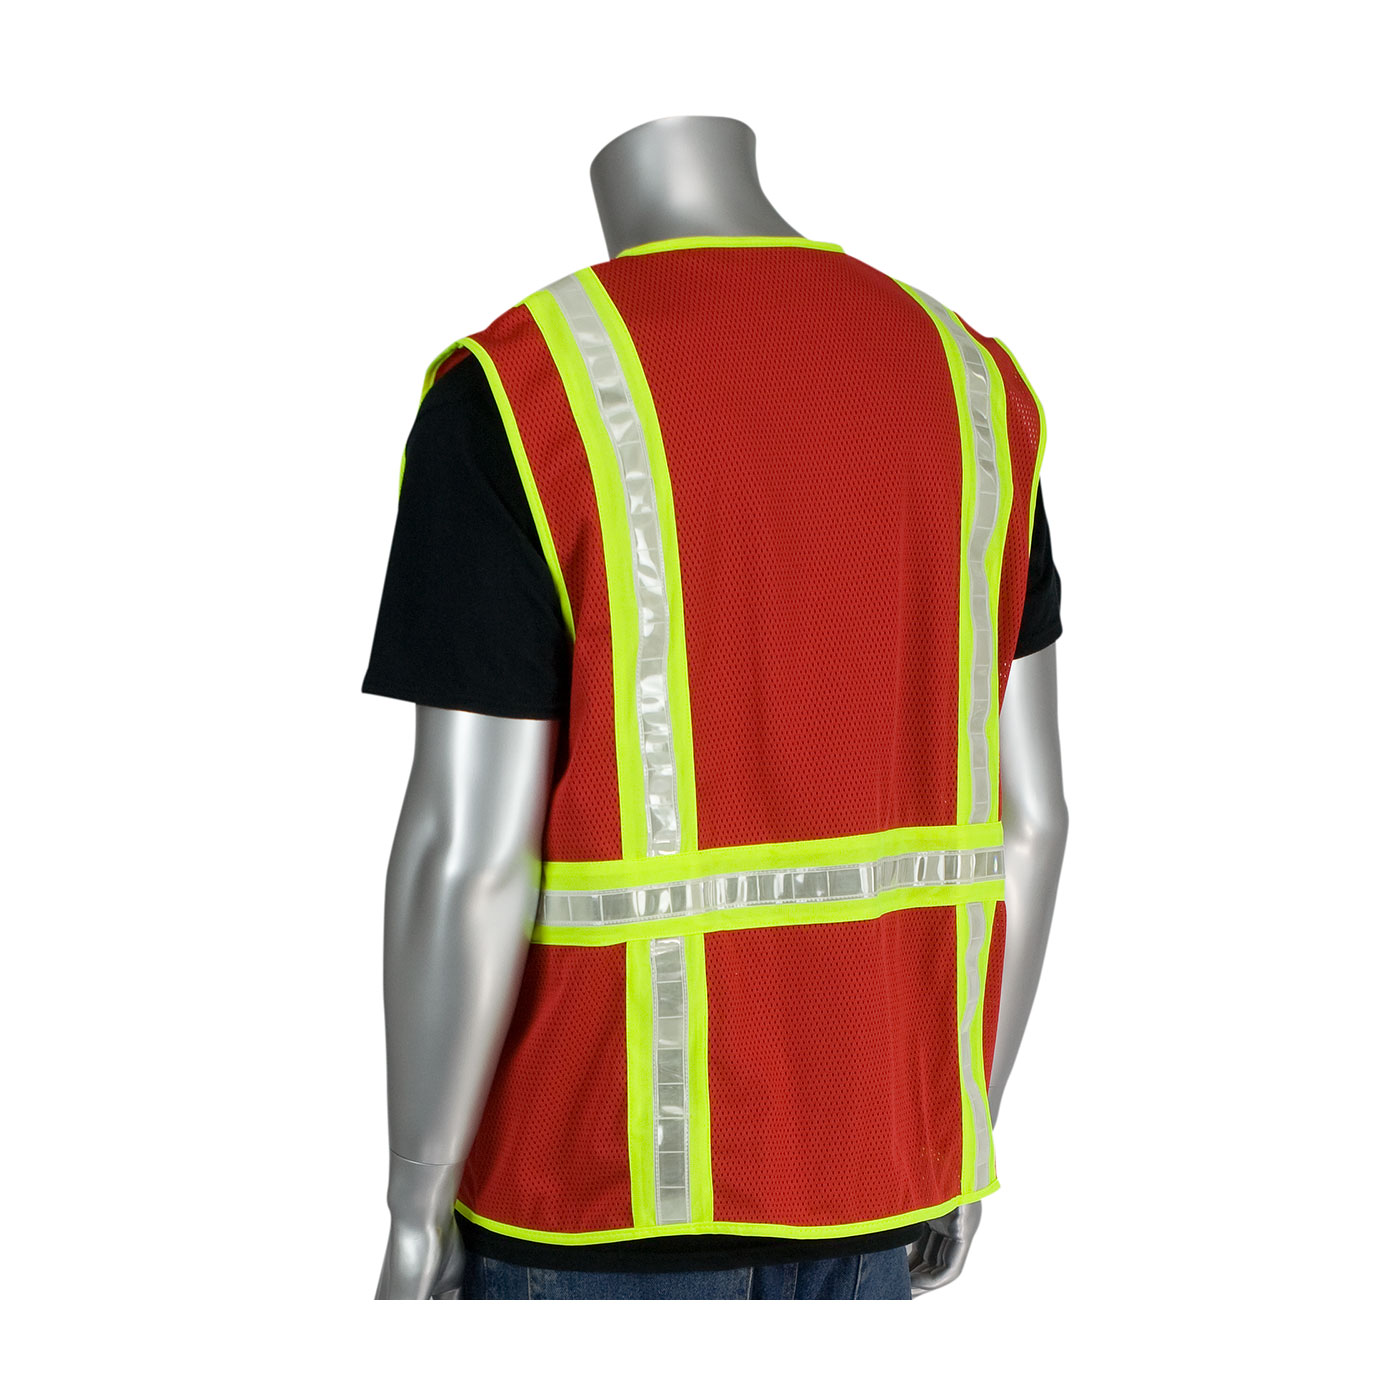 PIP Non-Ansi Surveyor's Style Safety Vest from Columbia Safety